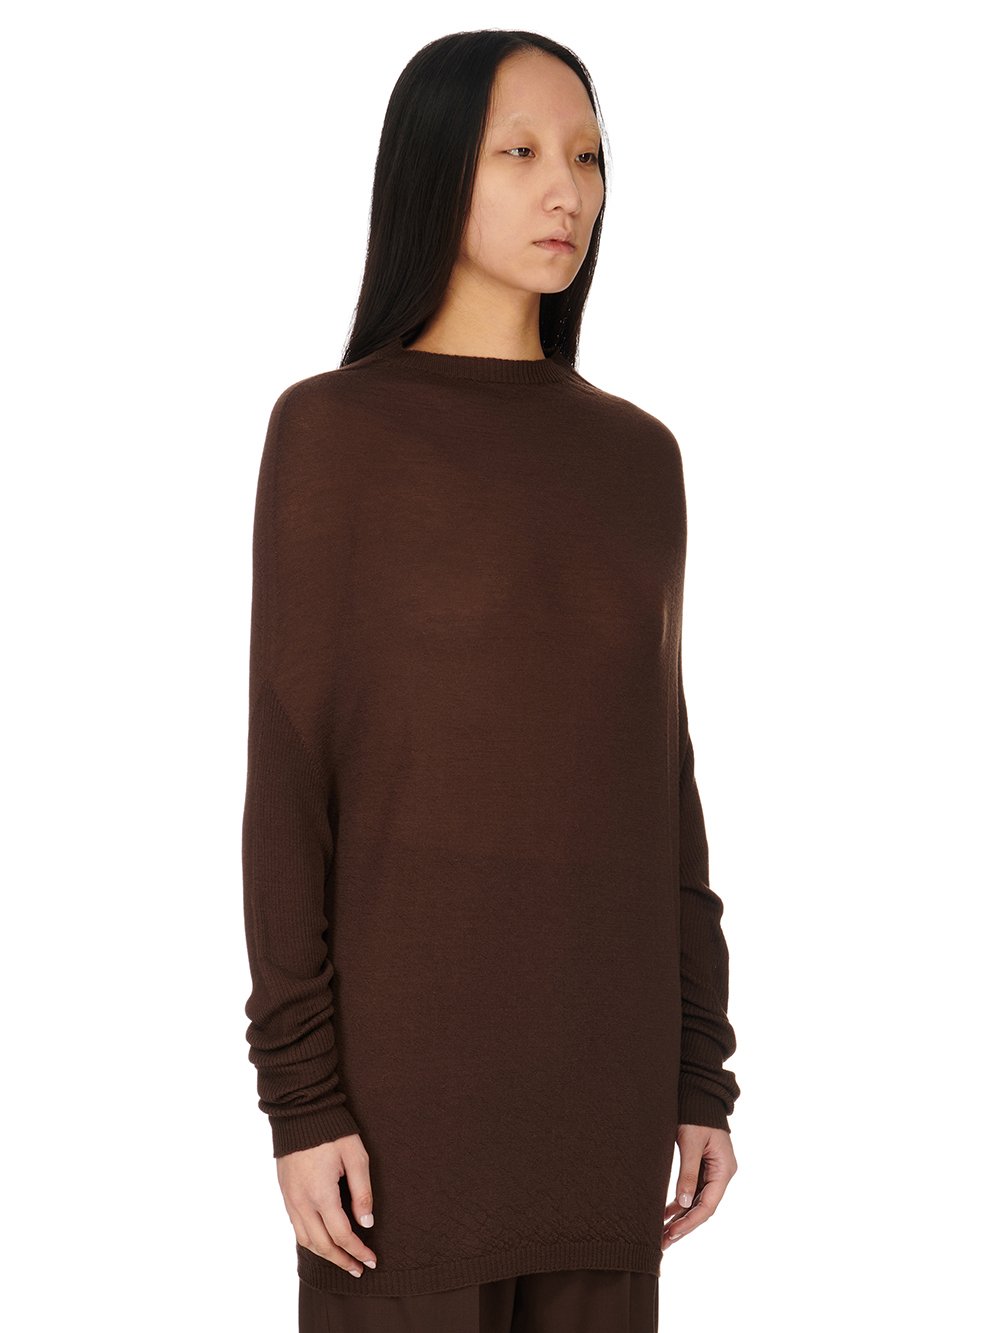 RICK OWENS FW23 LUXOR CRATER KNIT IN BROWN LIGHTWEIGHT RASATO KNIT